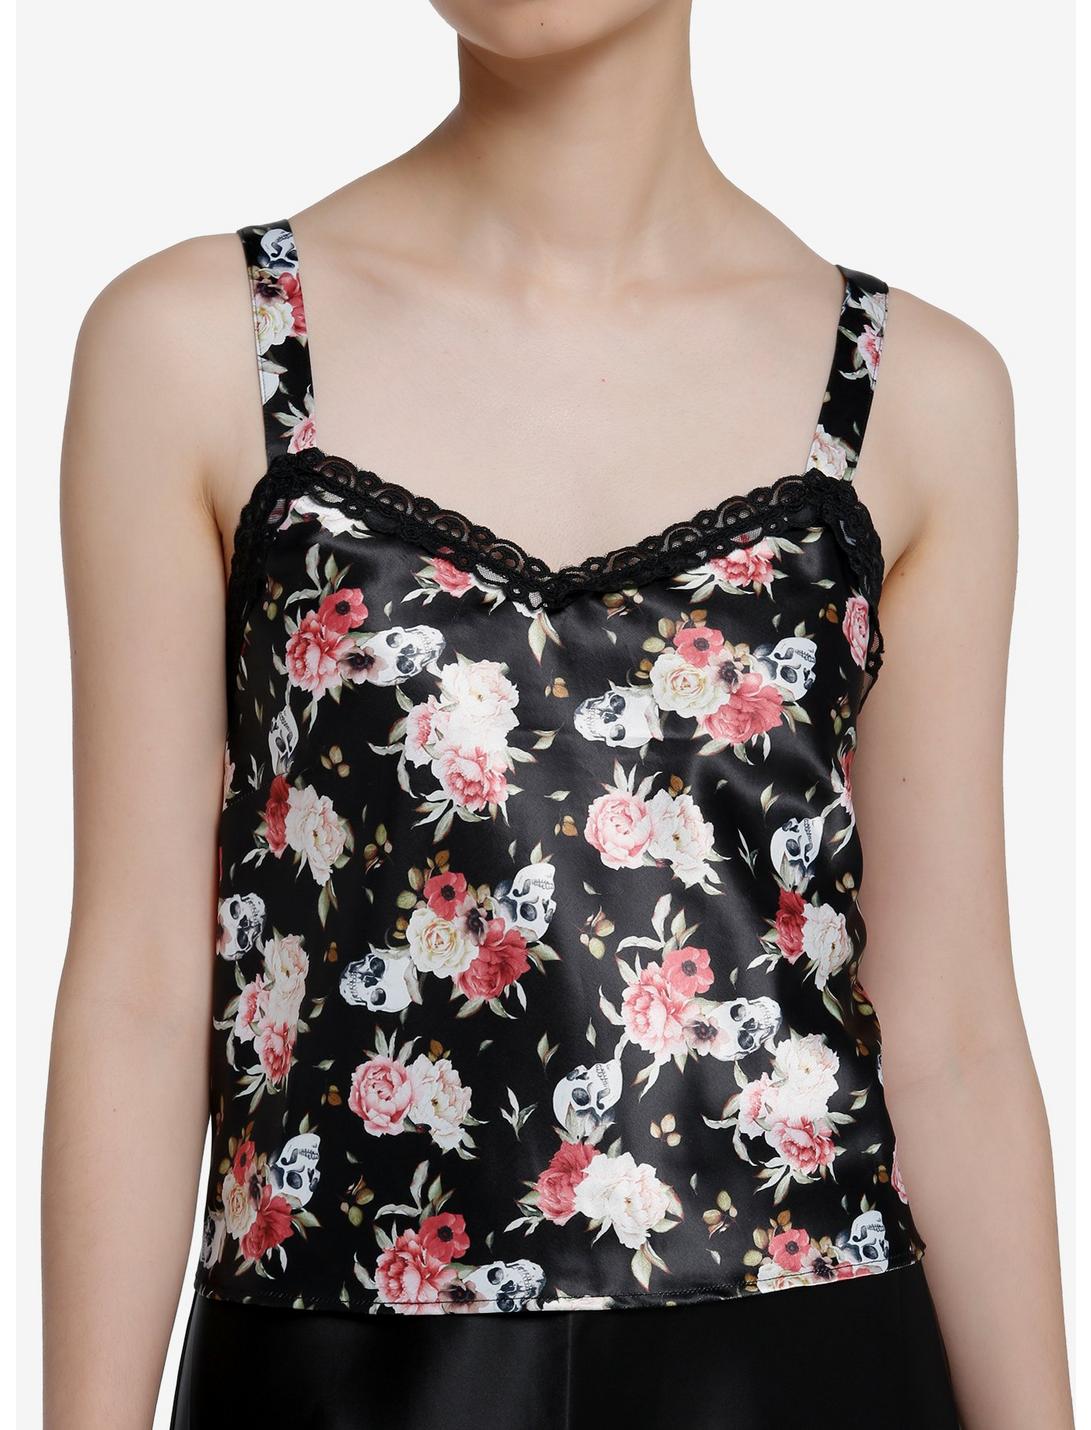 Skull & Flowers Satin & Lace Girls Strappy Tank Top, MULTI, hi-res